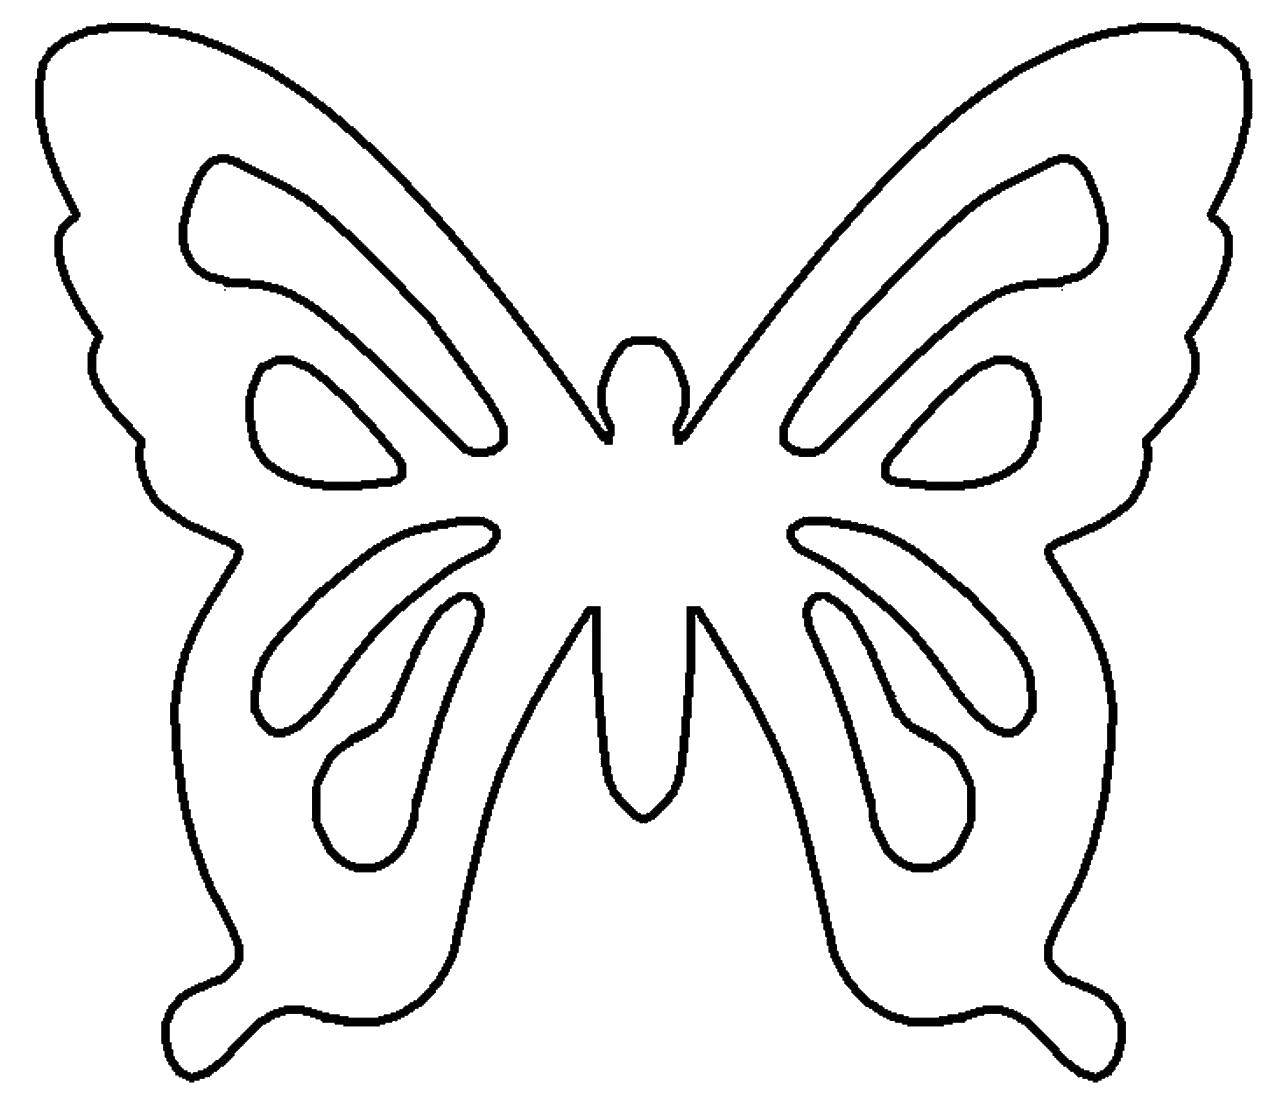 Coloring The outline of the butterfly to clip. Category the contours for cutting out butterflies. Tags:  the contours, patterns, butterflies.